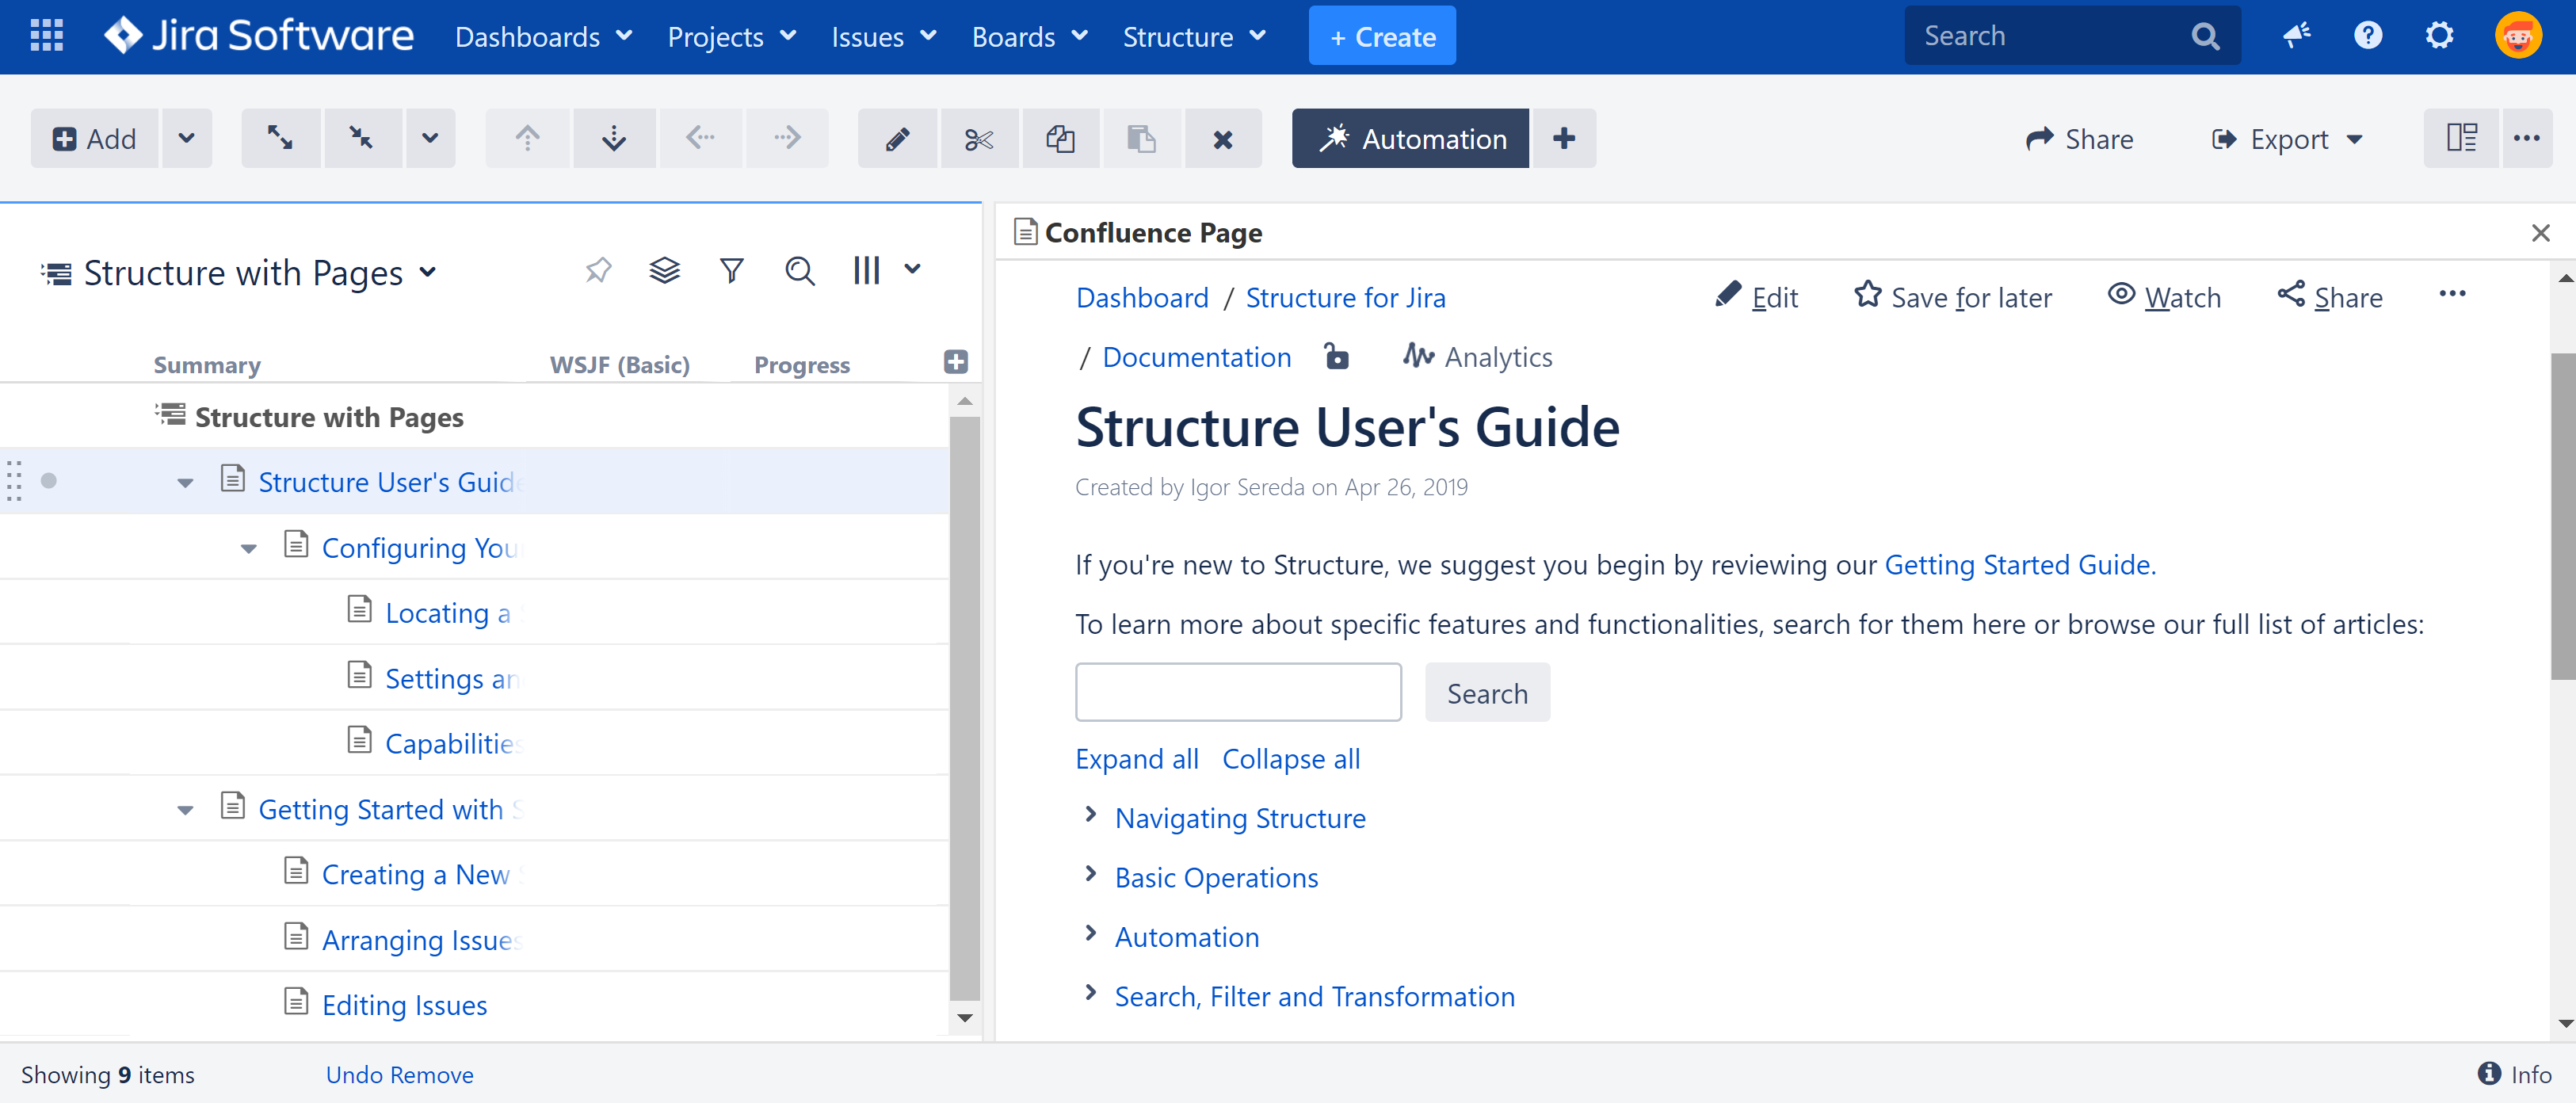 Viewing and Editing Confluence Pages in Structure